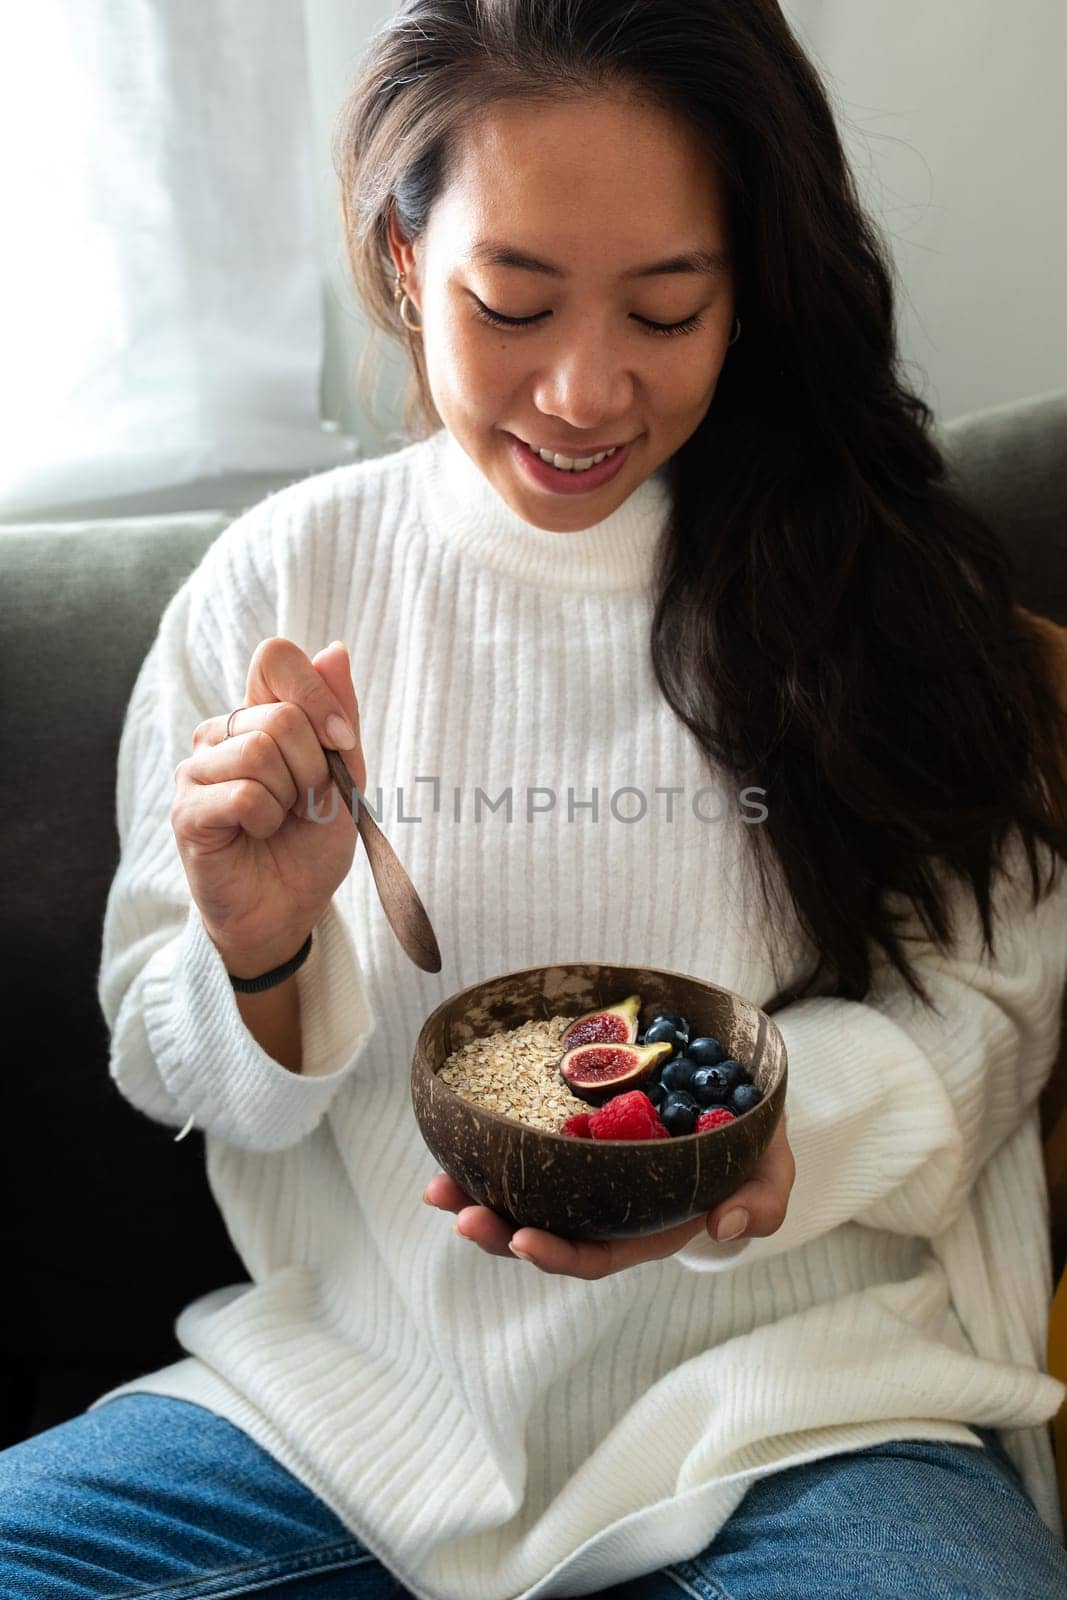 Vertical portrait of happy young Asian woman eating healthy smoothie breakfast bowl of oats and fruit on the couch. by Hoverstock